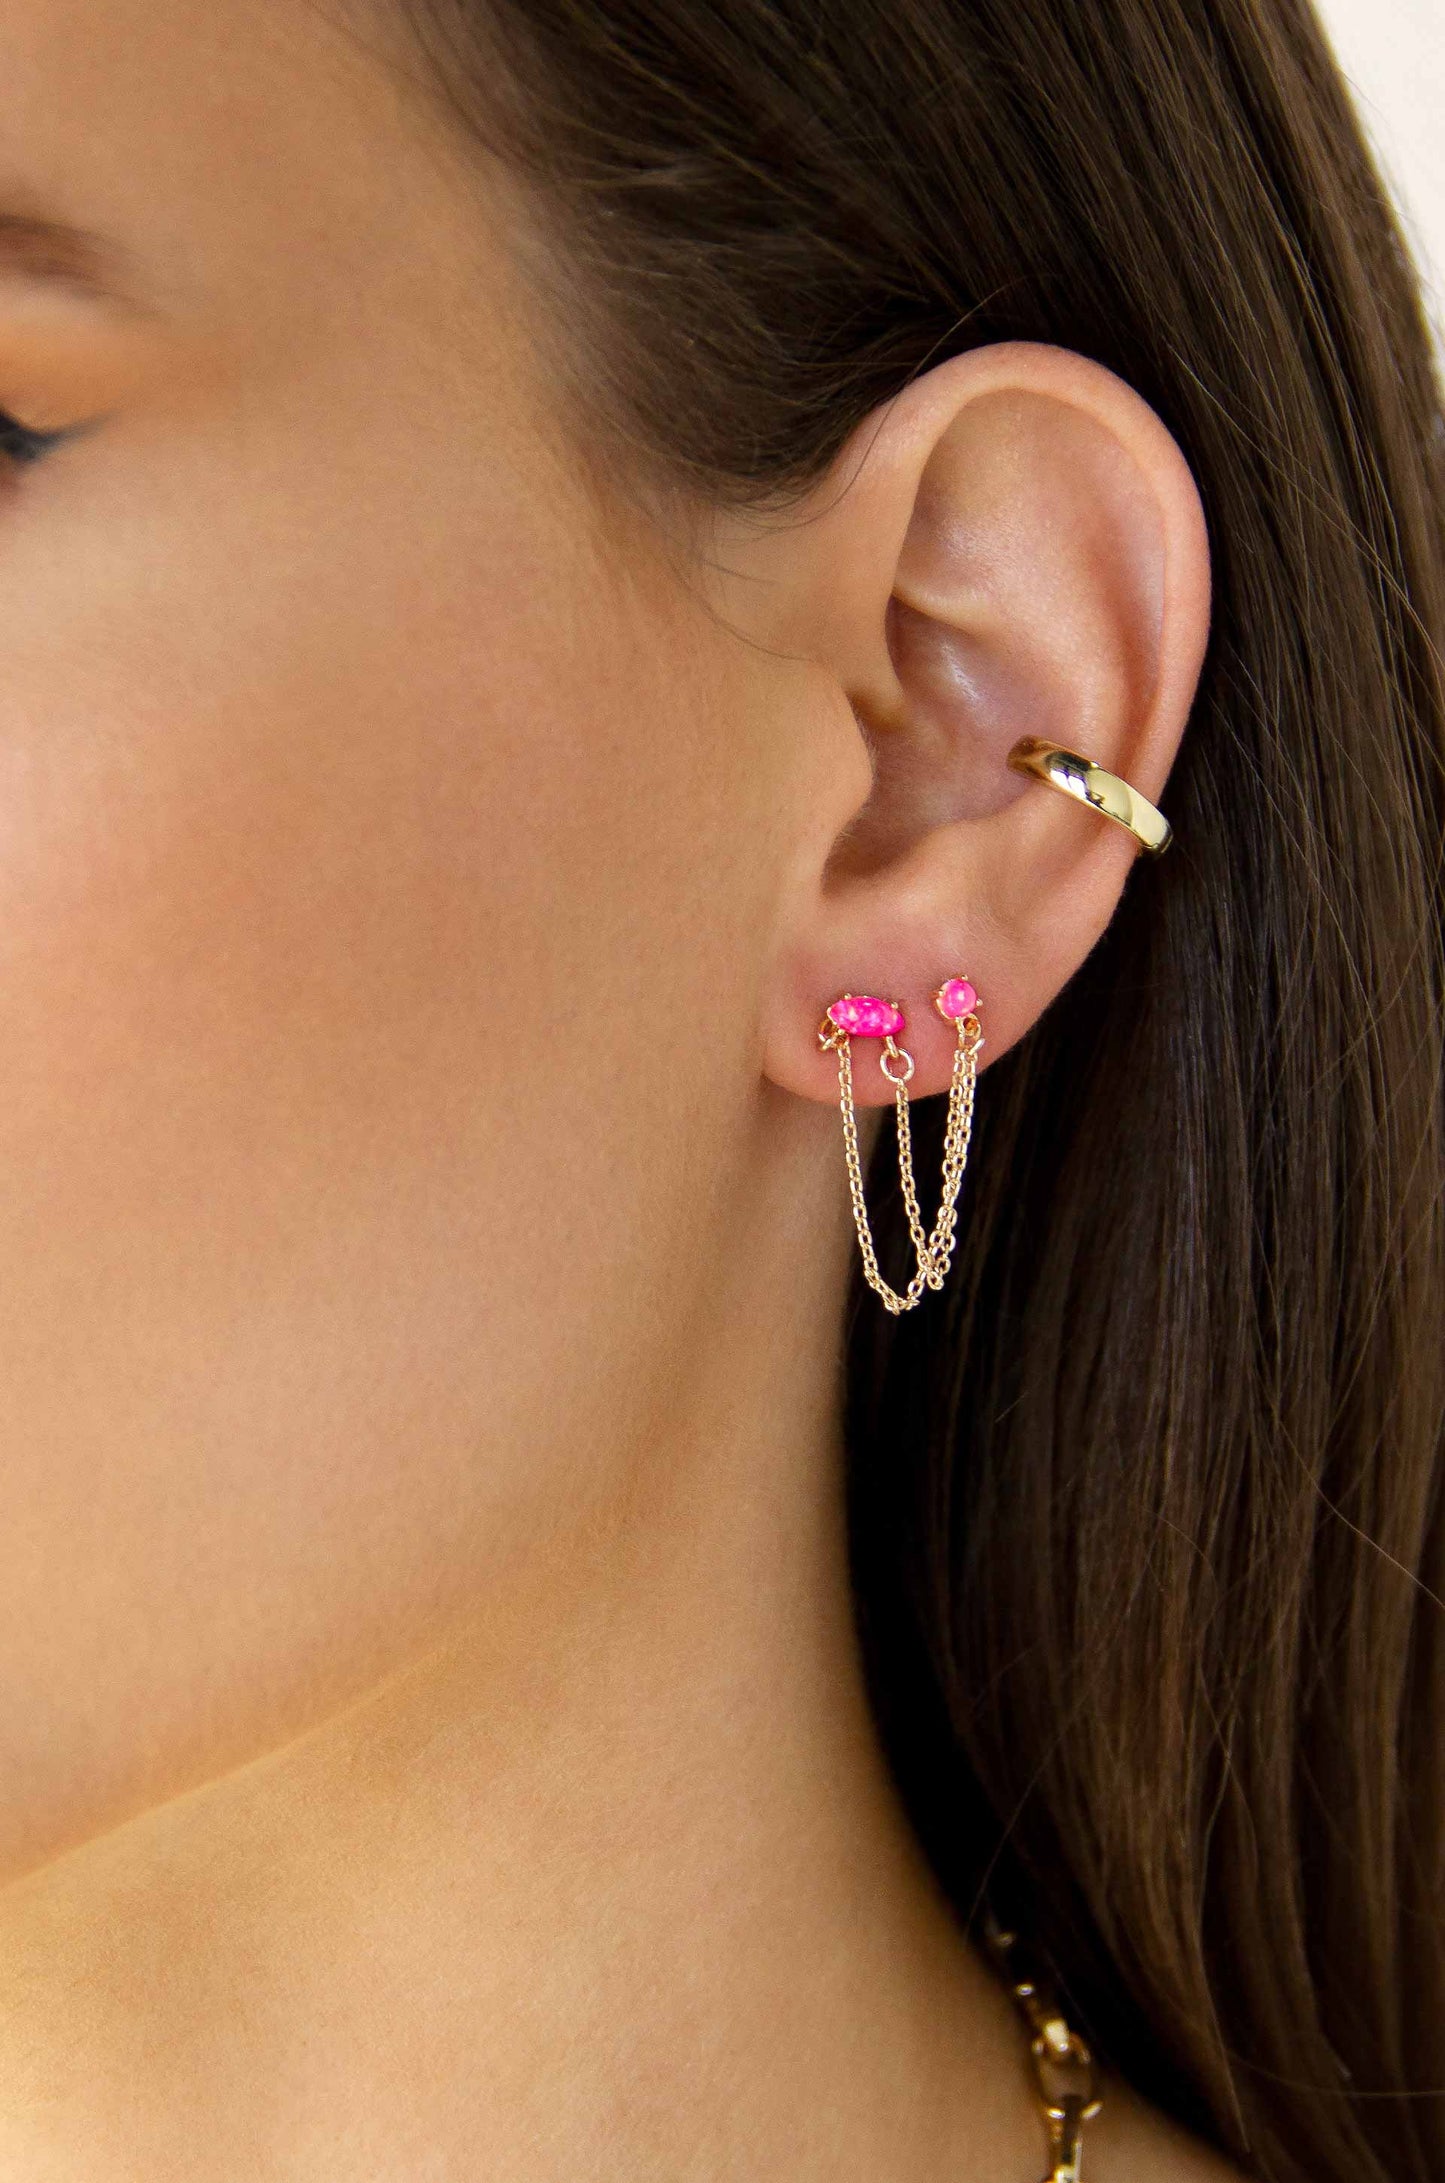 Two Hole Piercing Chain Dangle Earrings in pink crystals on a model